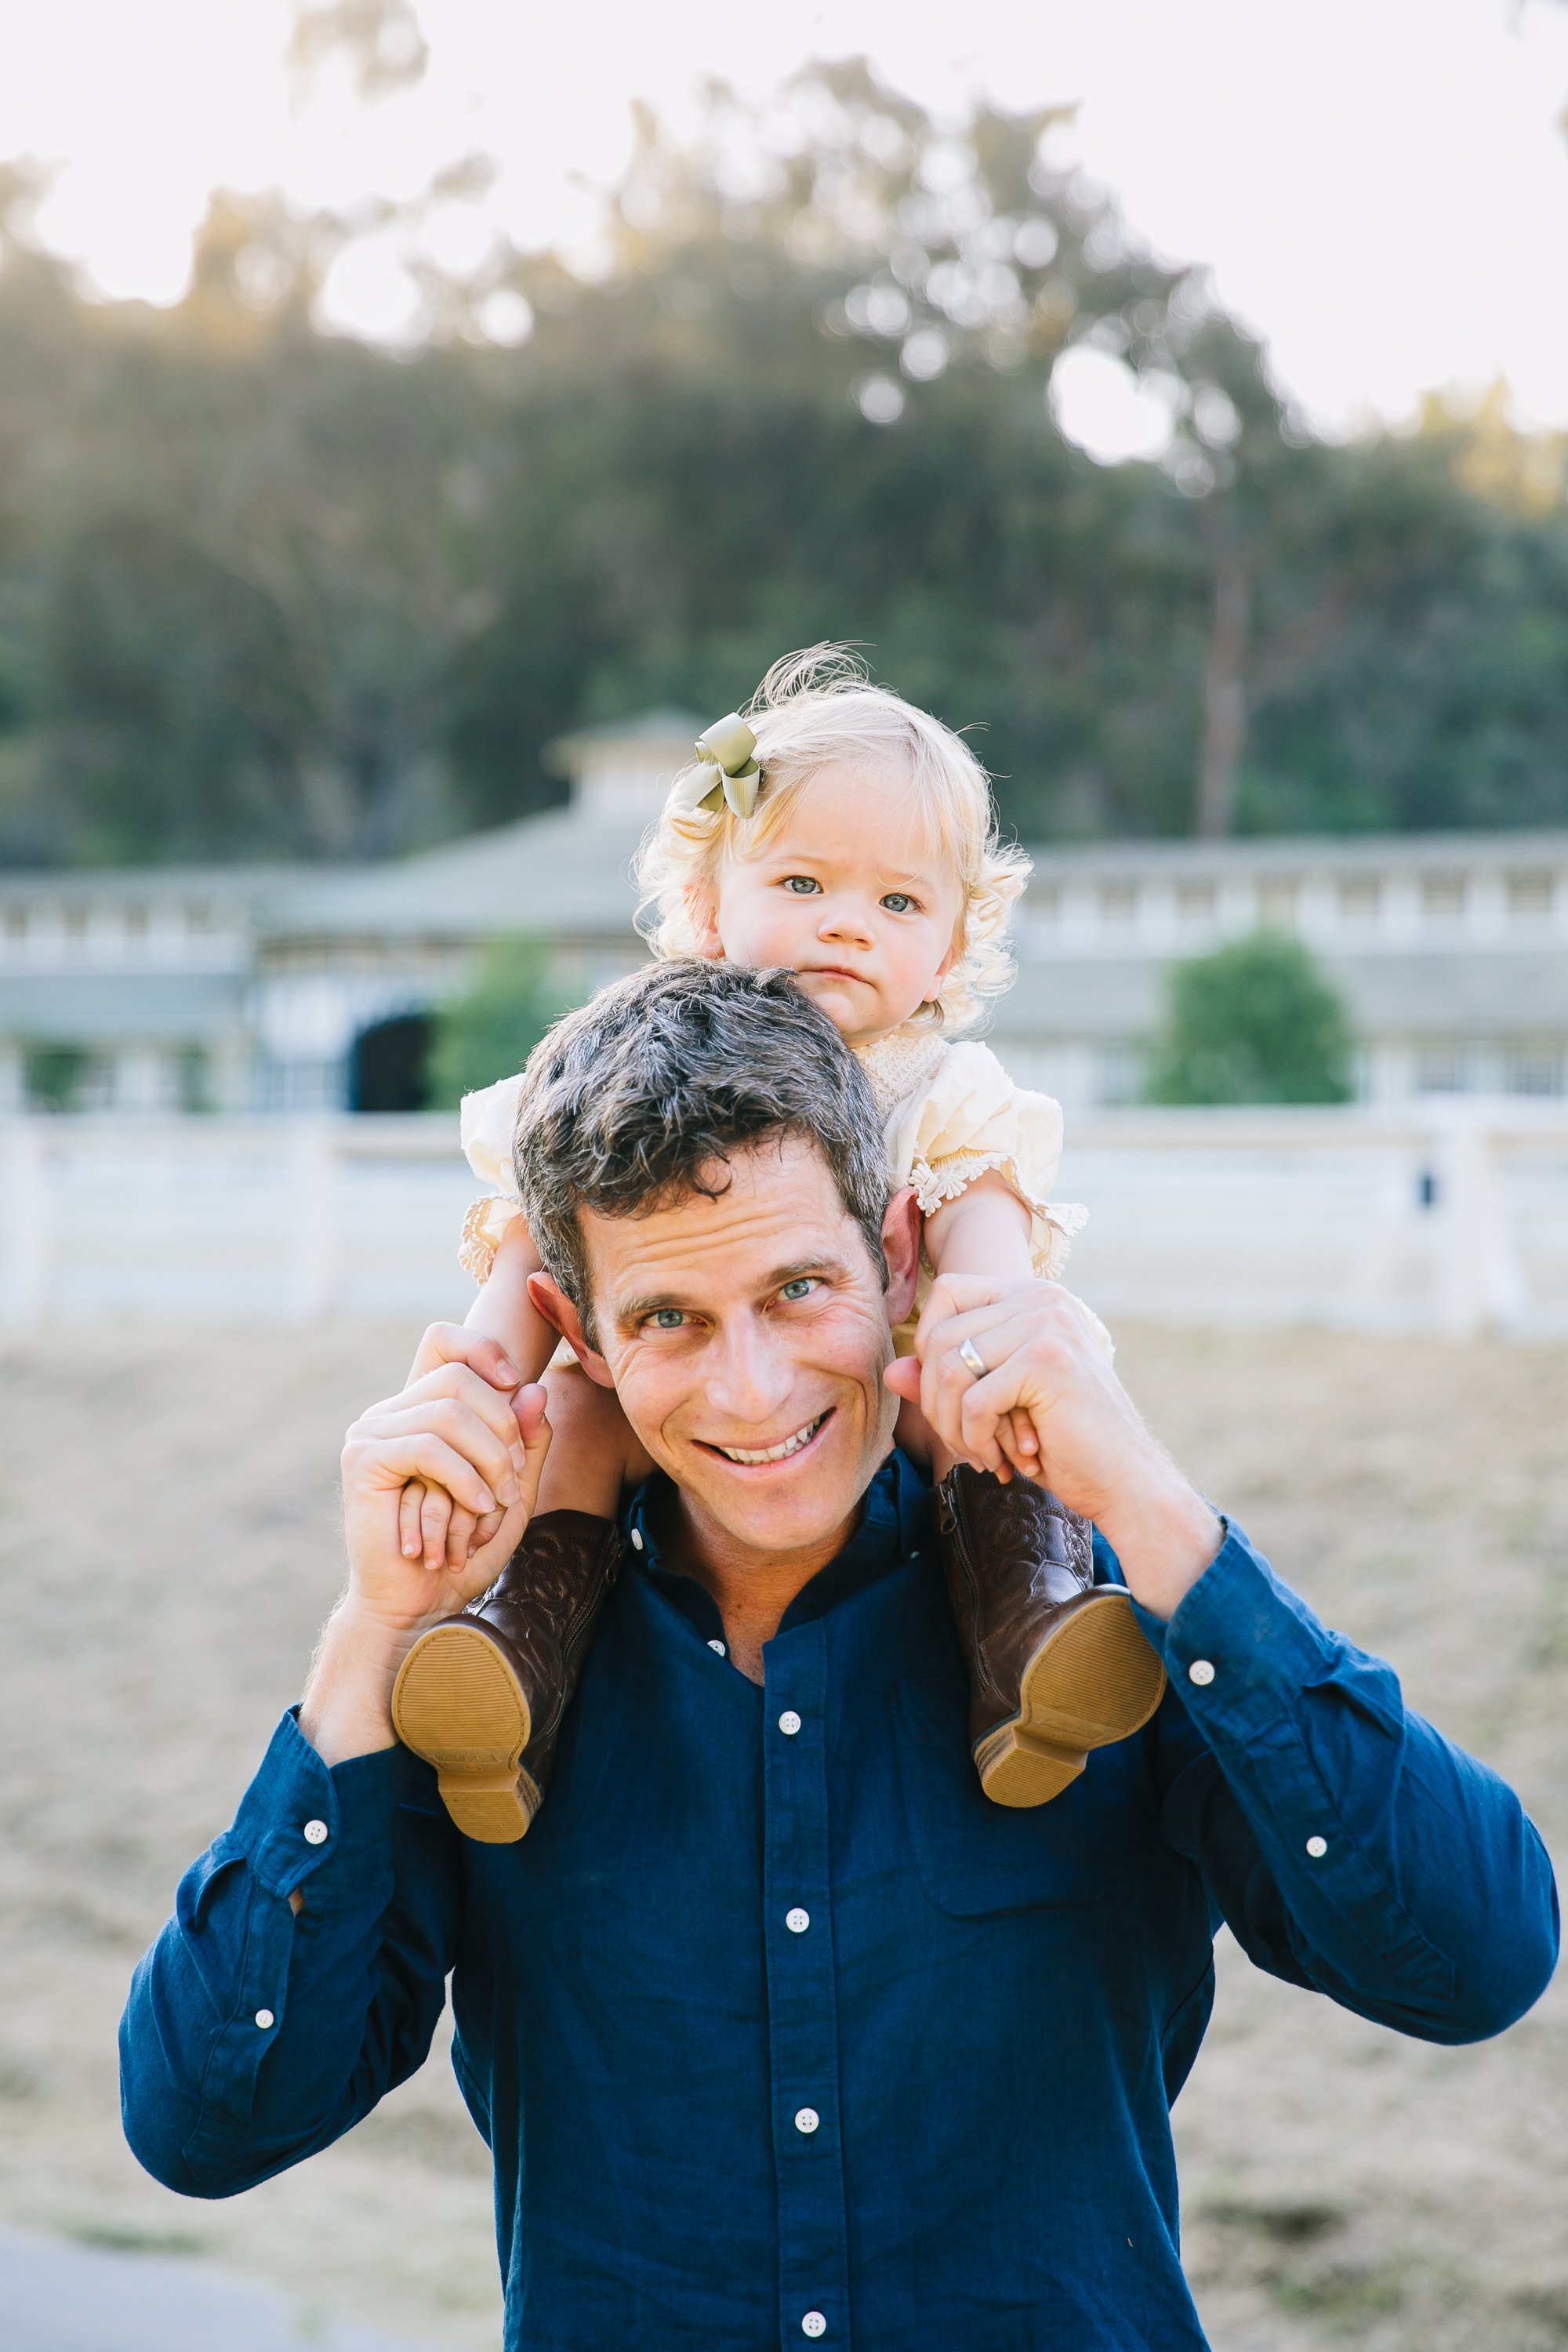 Los_Angeles_Family_Photographer_Golden_Hour_Mini_Session_Fall_Photos_Holiday_Card_Kids_Babies_Children_Luxury_Best_California_Photography-1030.jpg